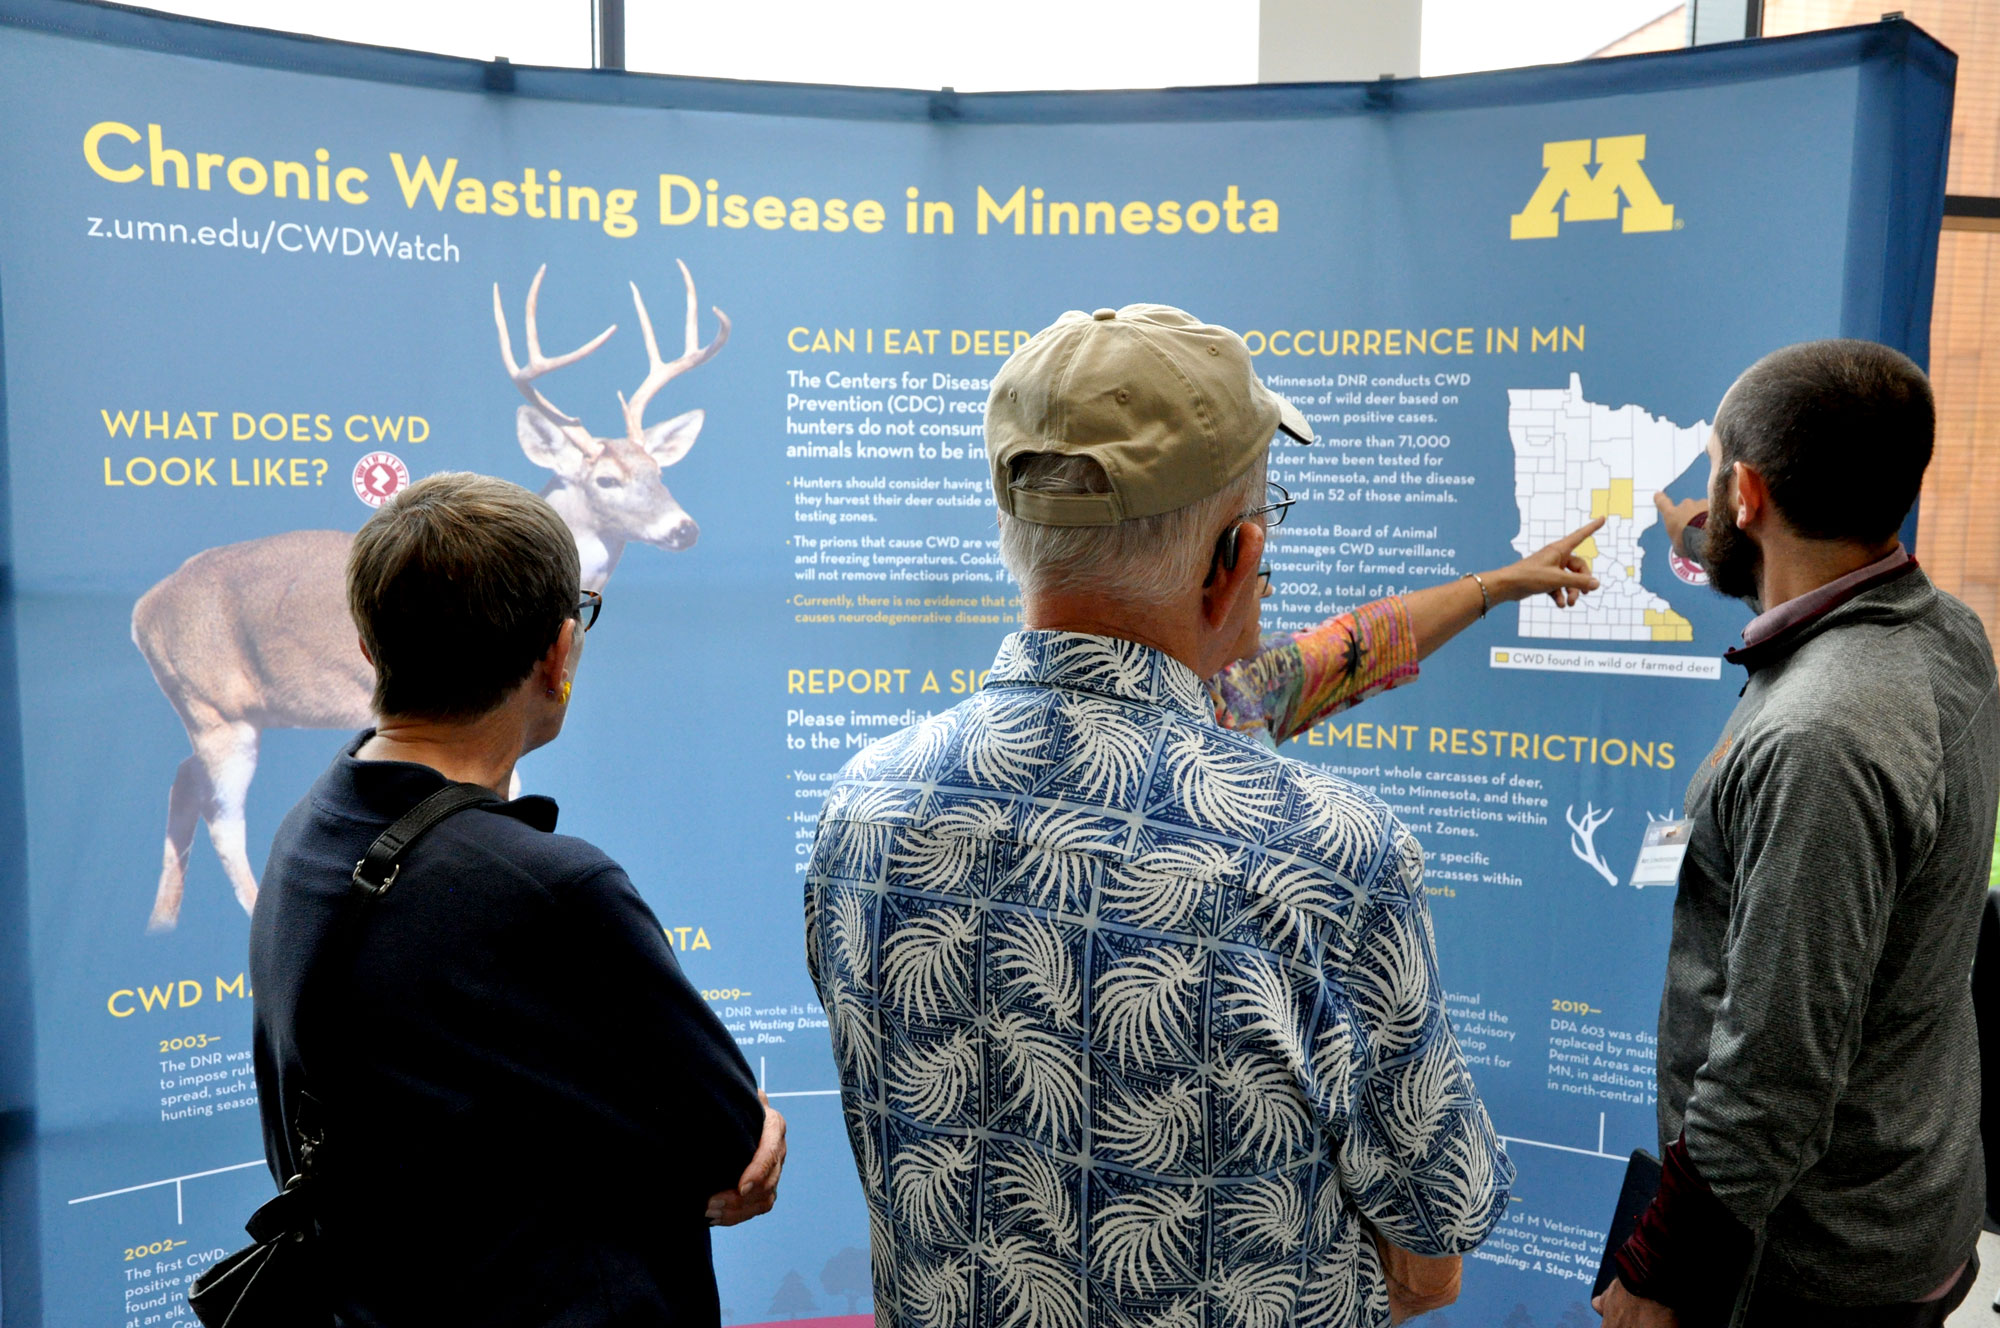 3 people looking at an information display to learn about CWD at the Bell Museum event